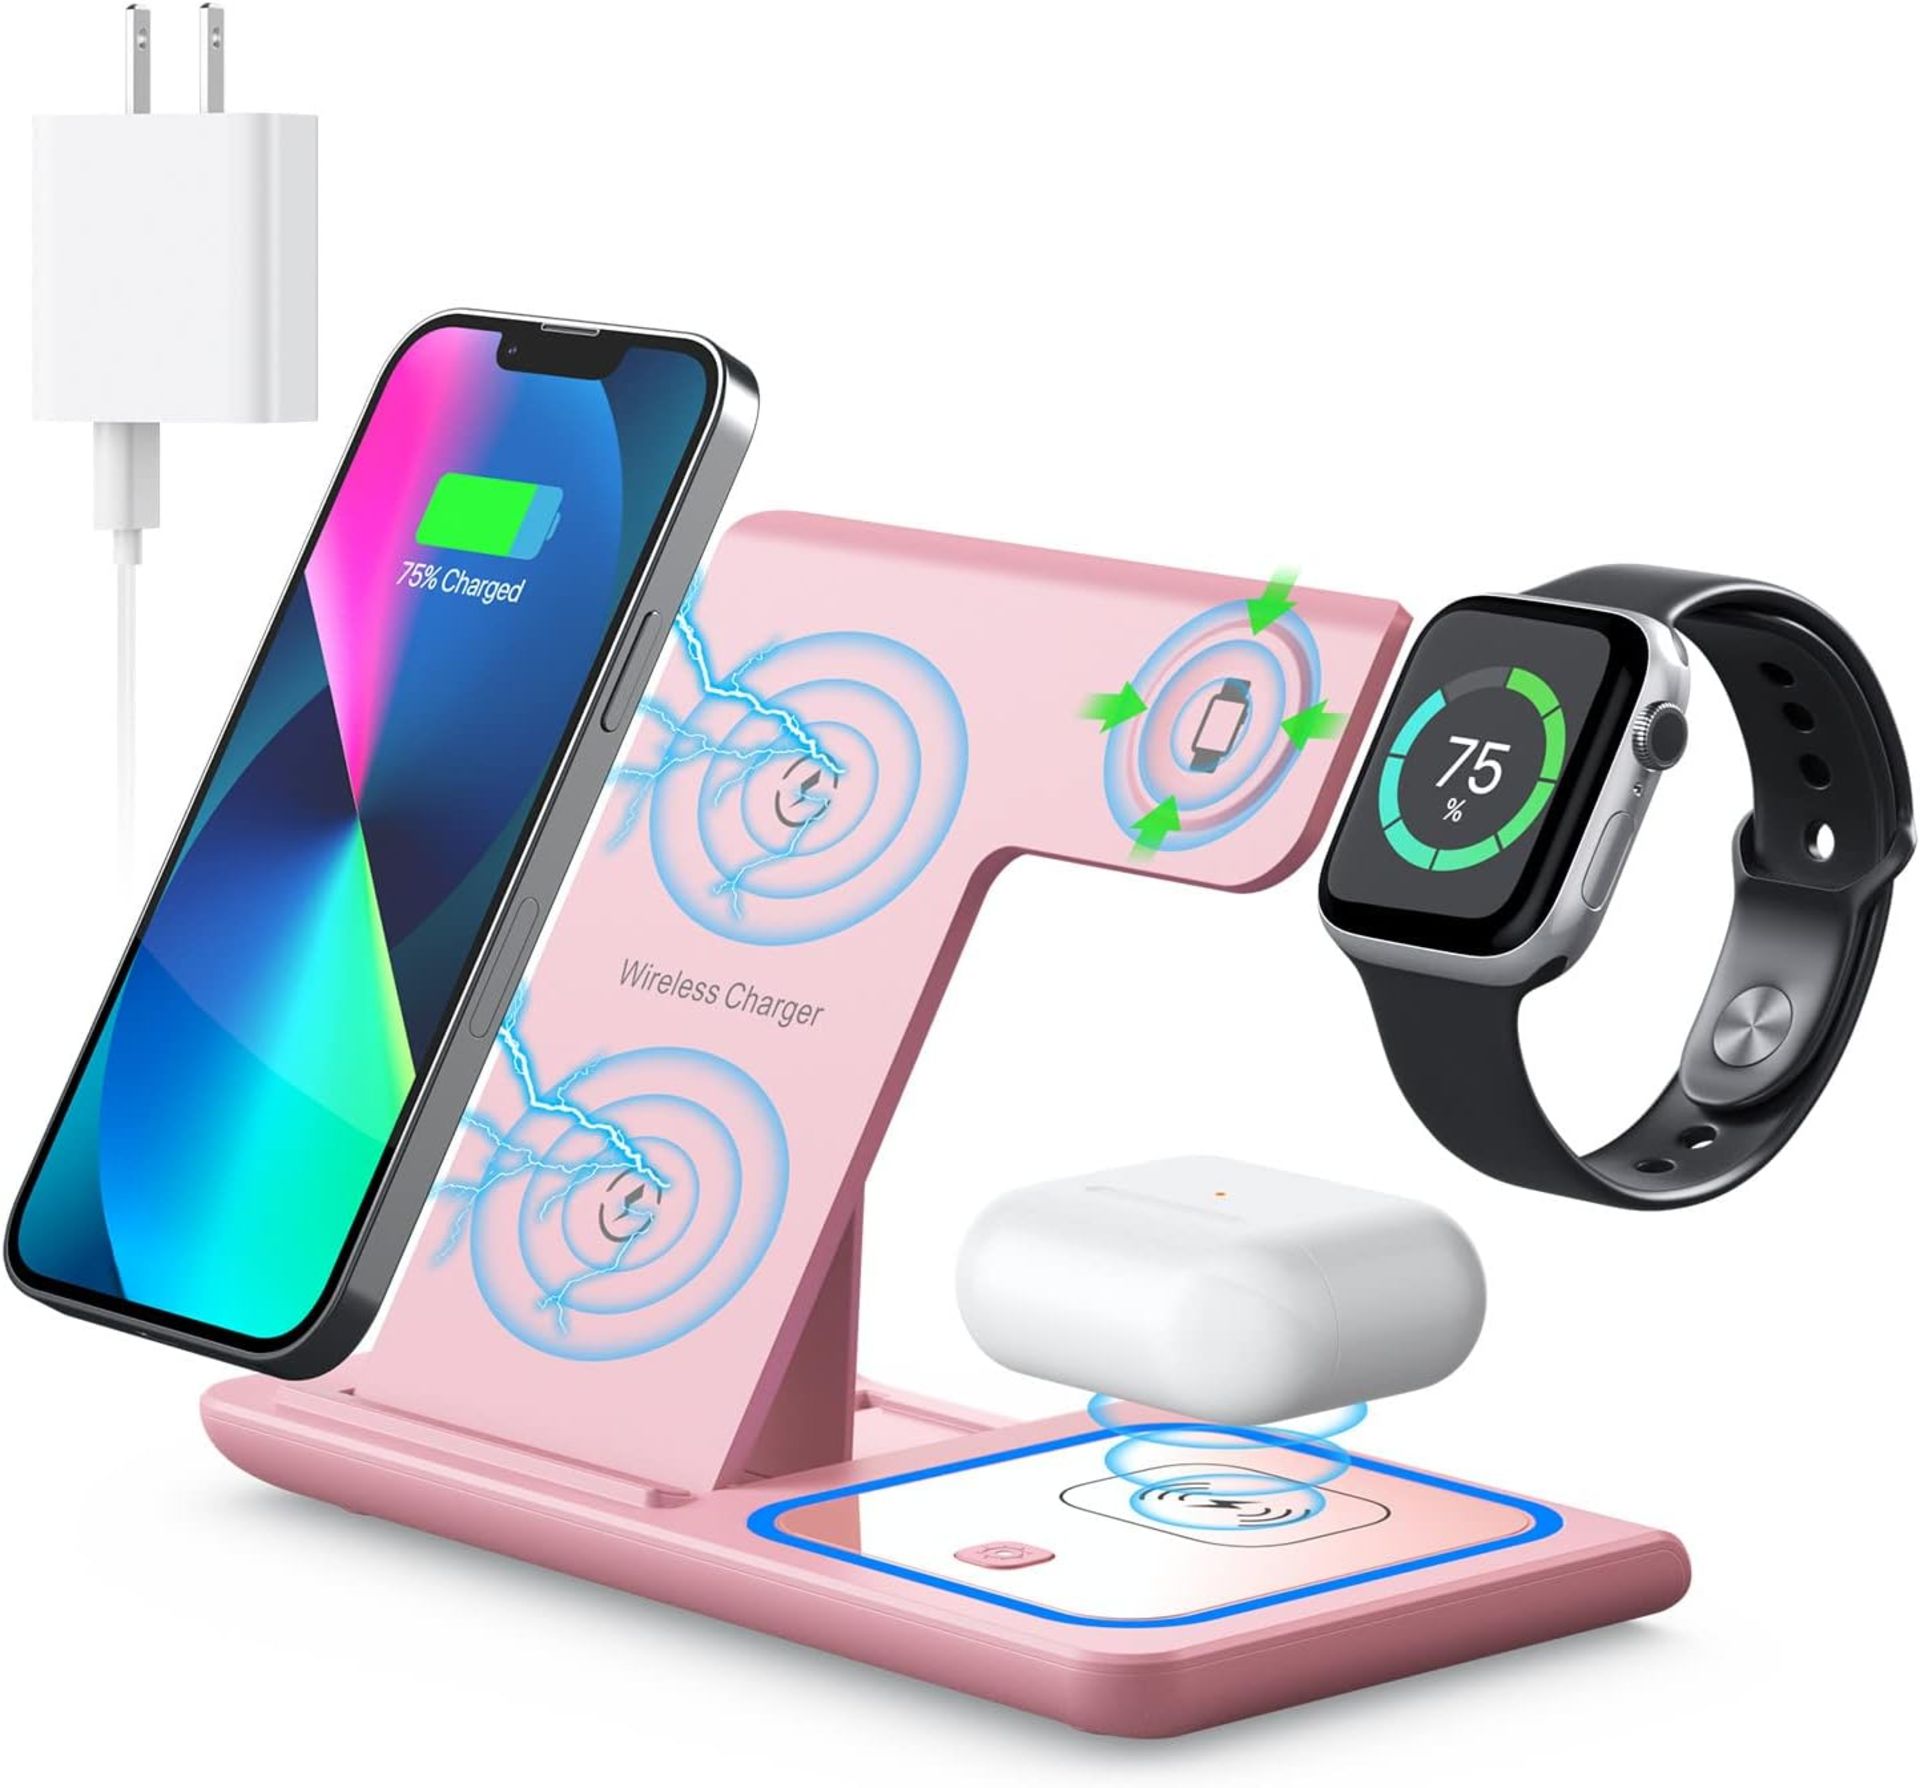 RRP £29.99 Yoxinta Wireless Charger, 3-In-1 Wireless Charger, Apple Watch Charger Stand,3 in 1